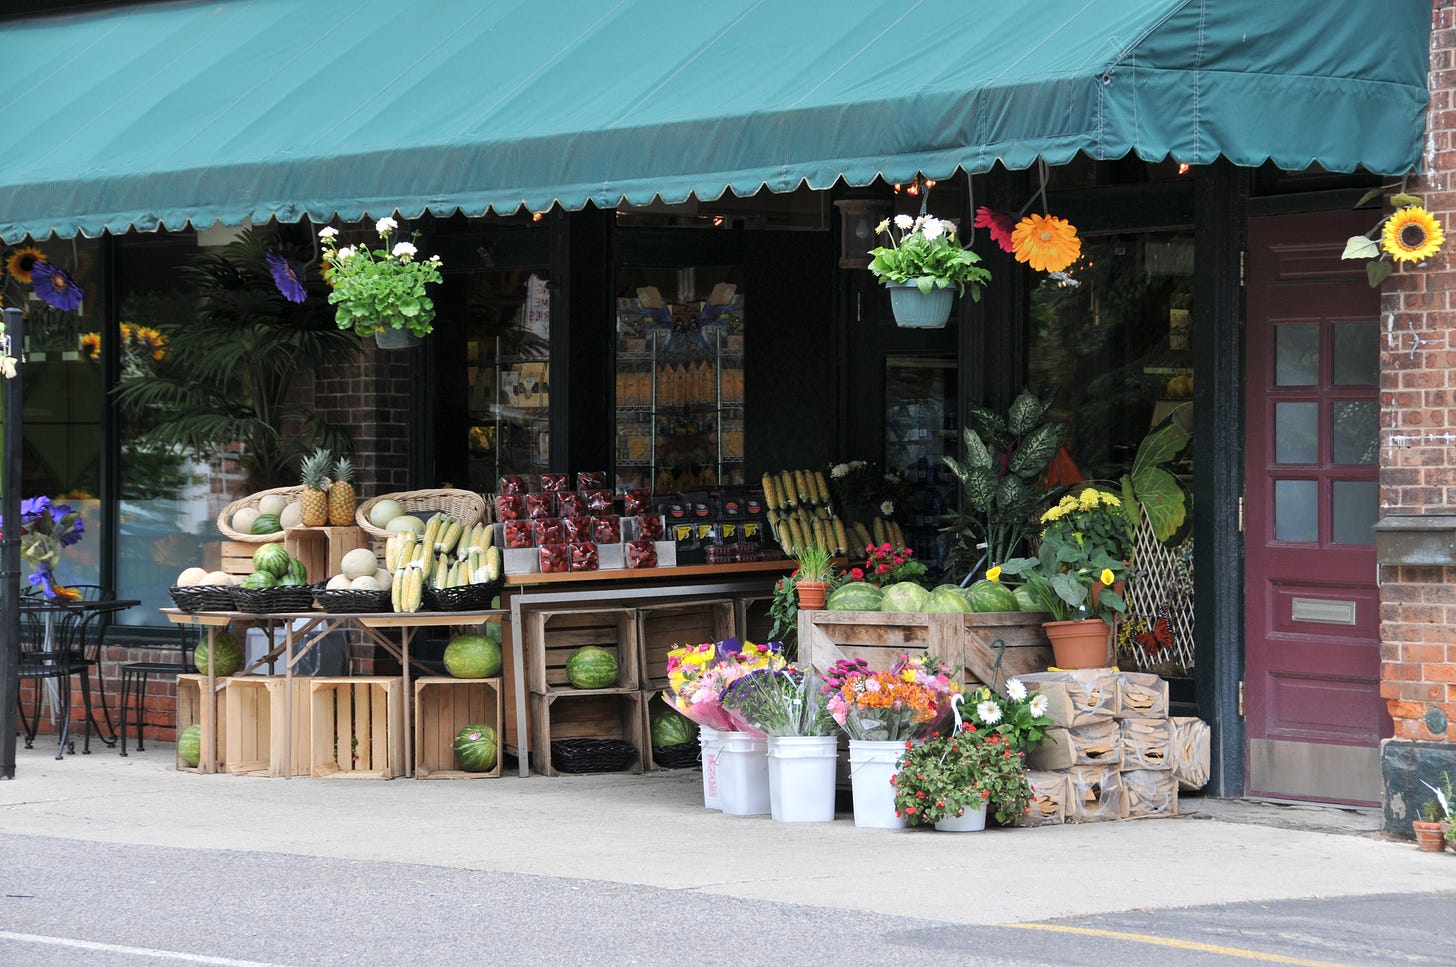 A neighborhood grocery store with a display of produce.